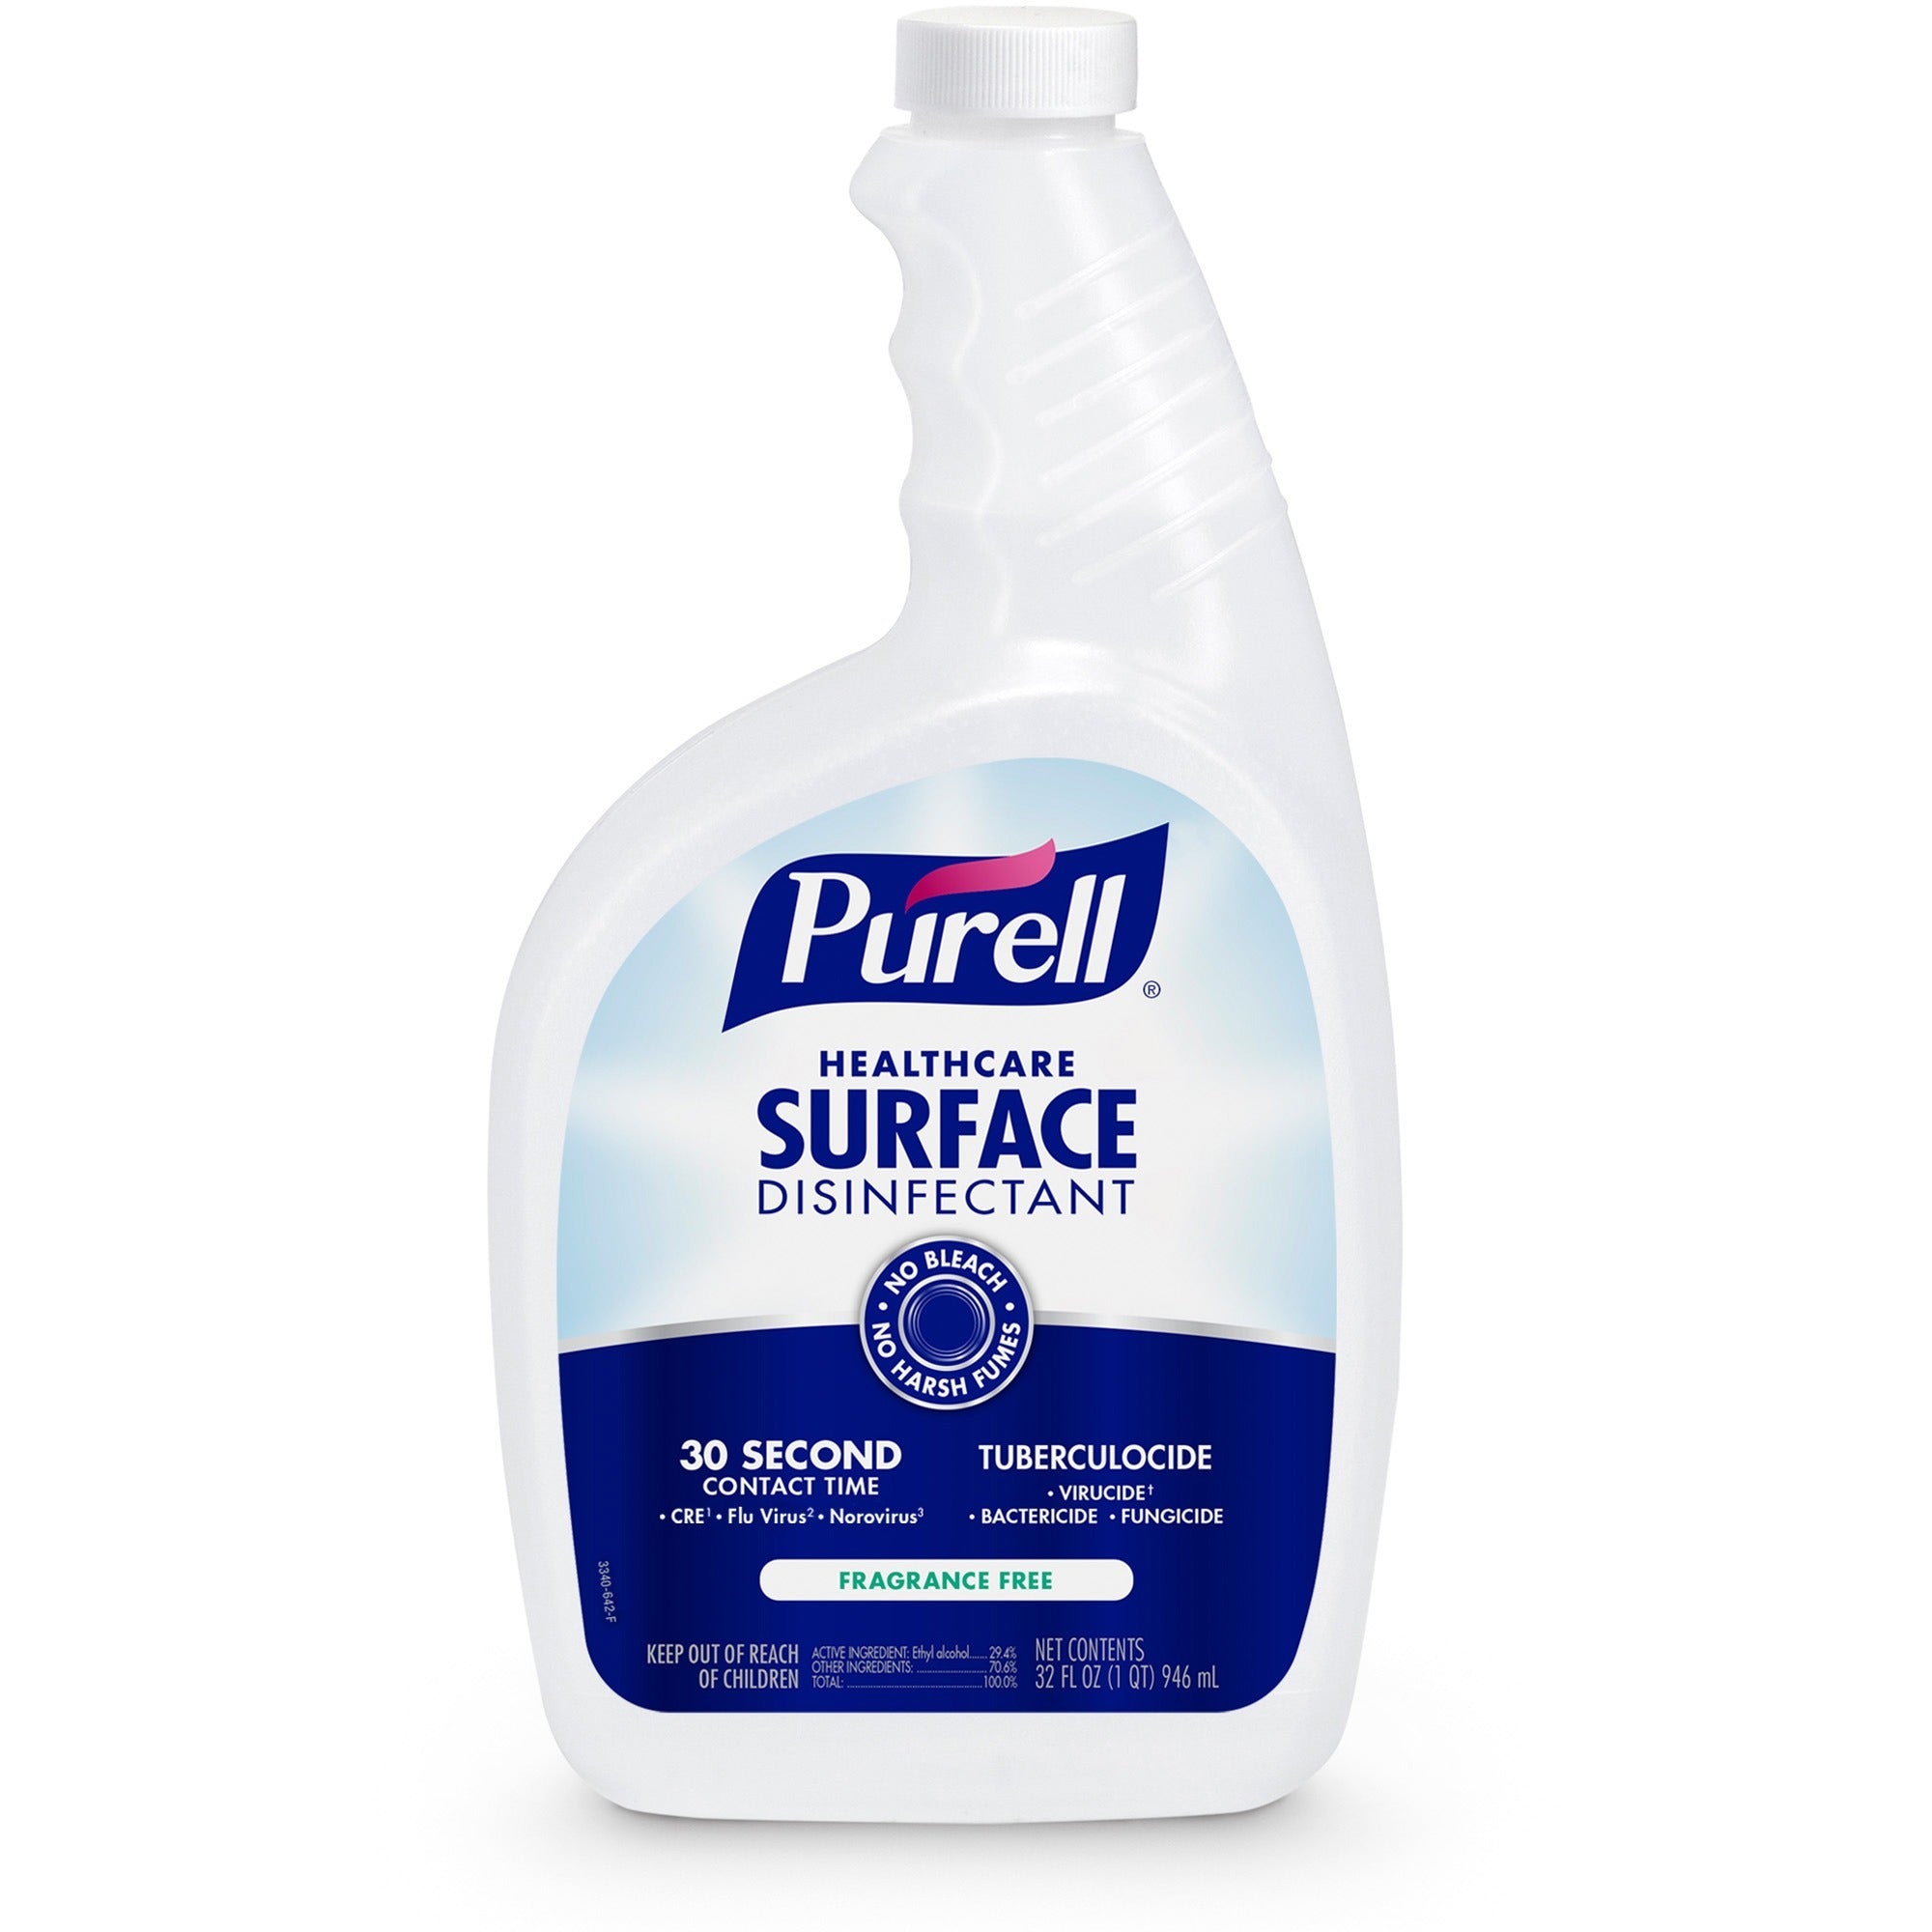 purell-healthcare-surface-disinfectant-ready-to-use-32-fl-oz-1-quartspray-bottle-6-carton-disinfectant-fragrance-free-bleach-resistant-non-irritating-odor-free-clear_goj334006 - 1